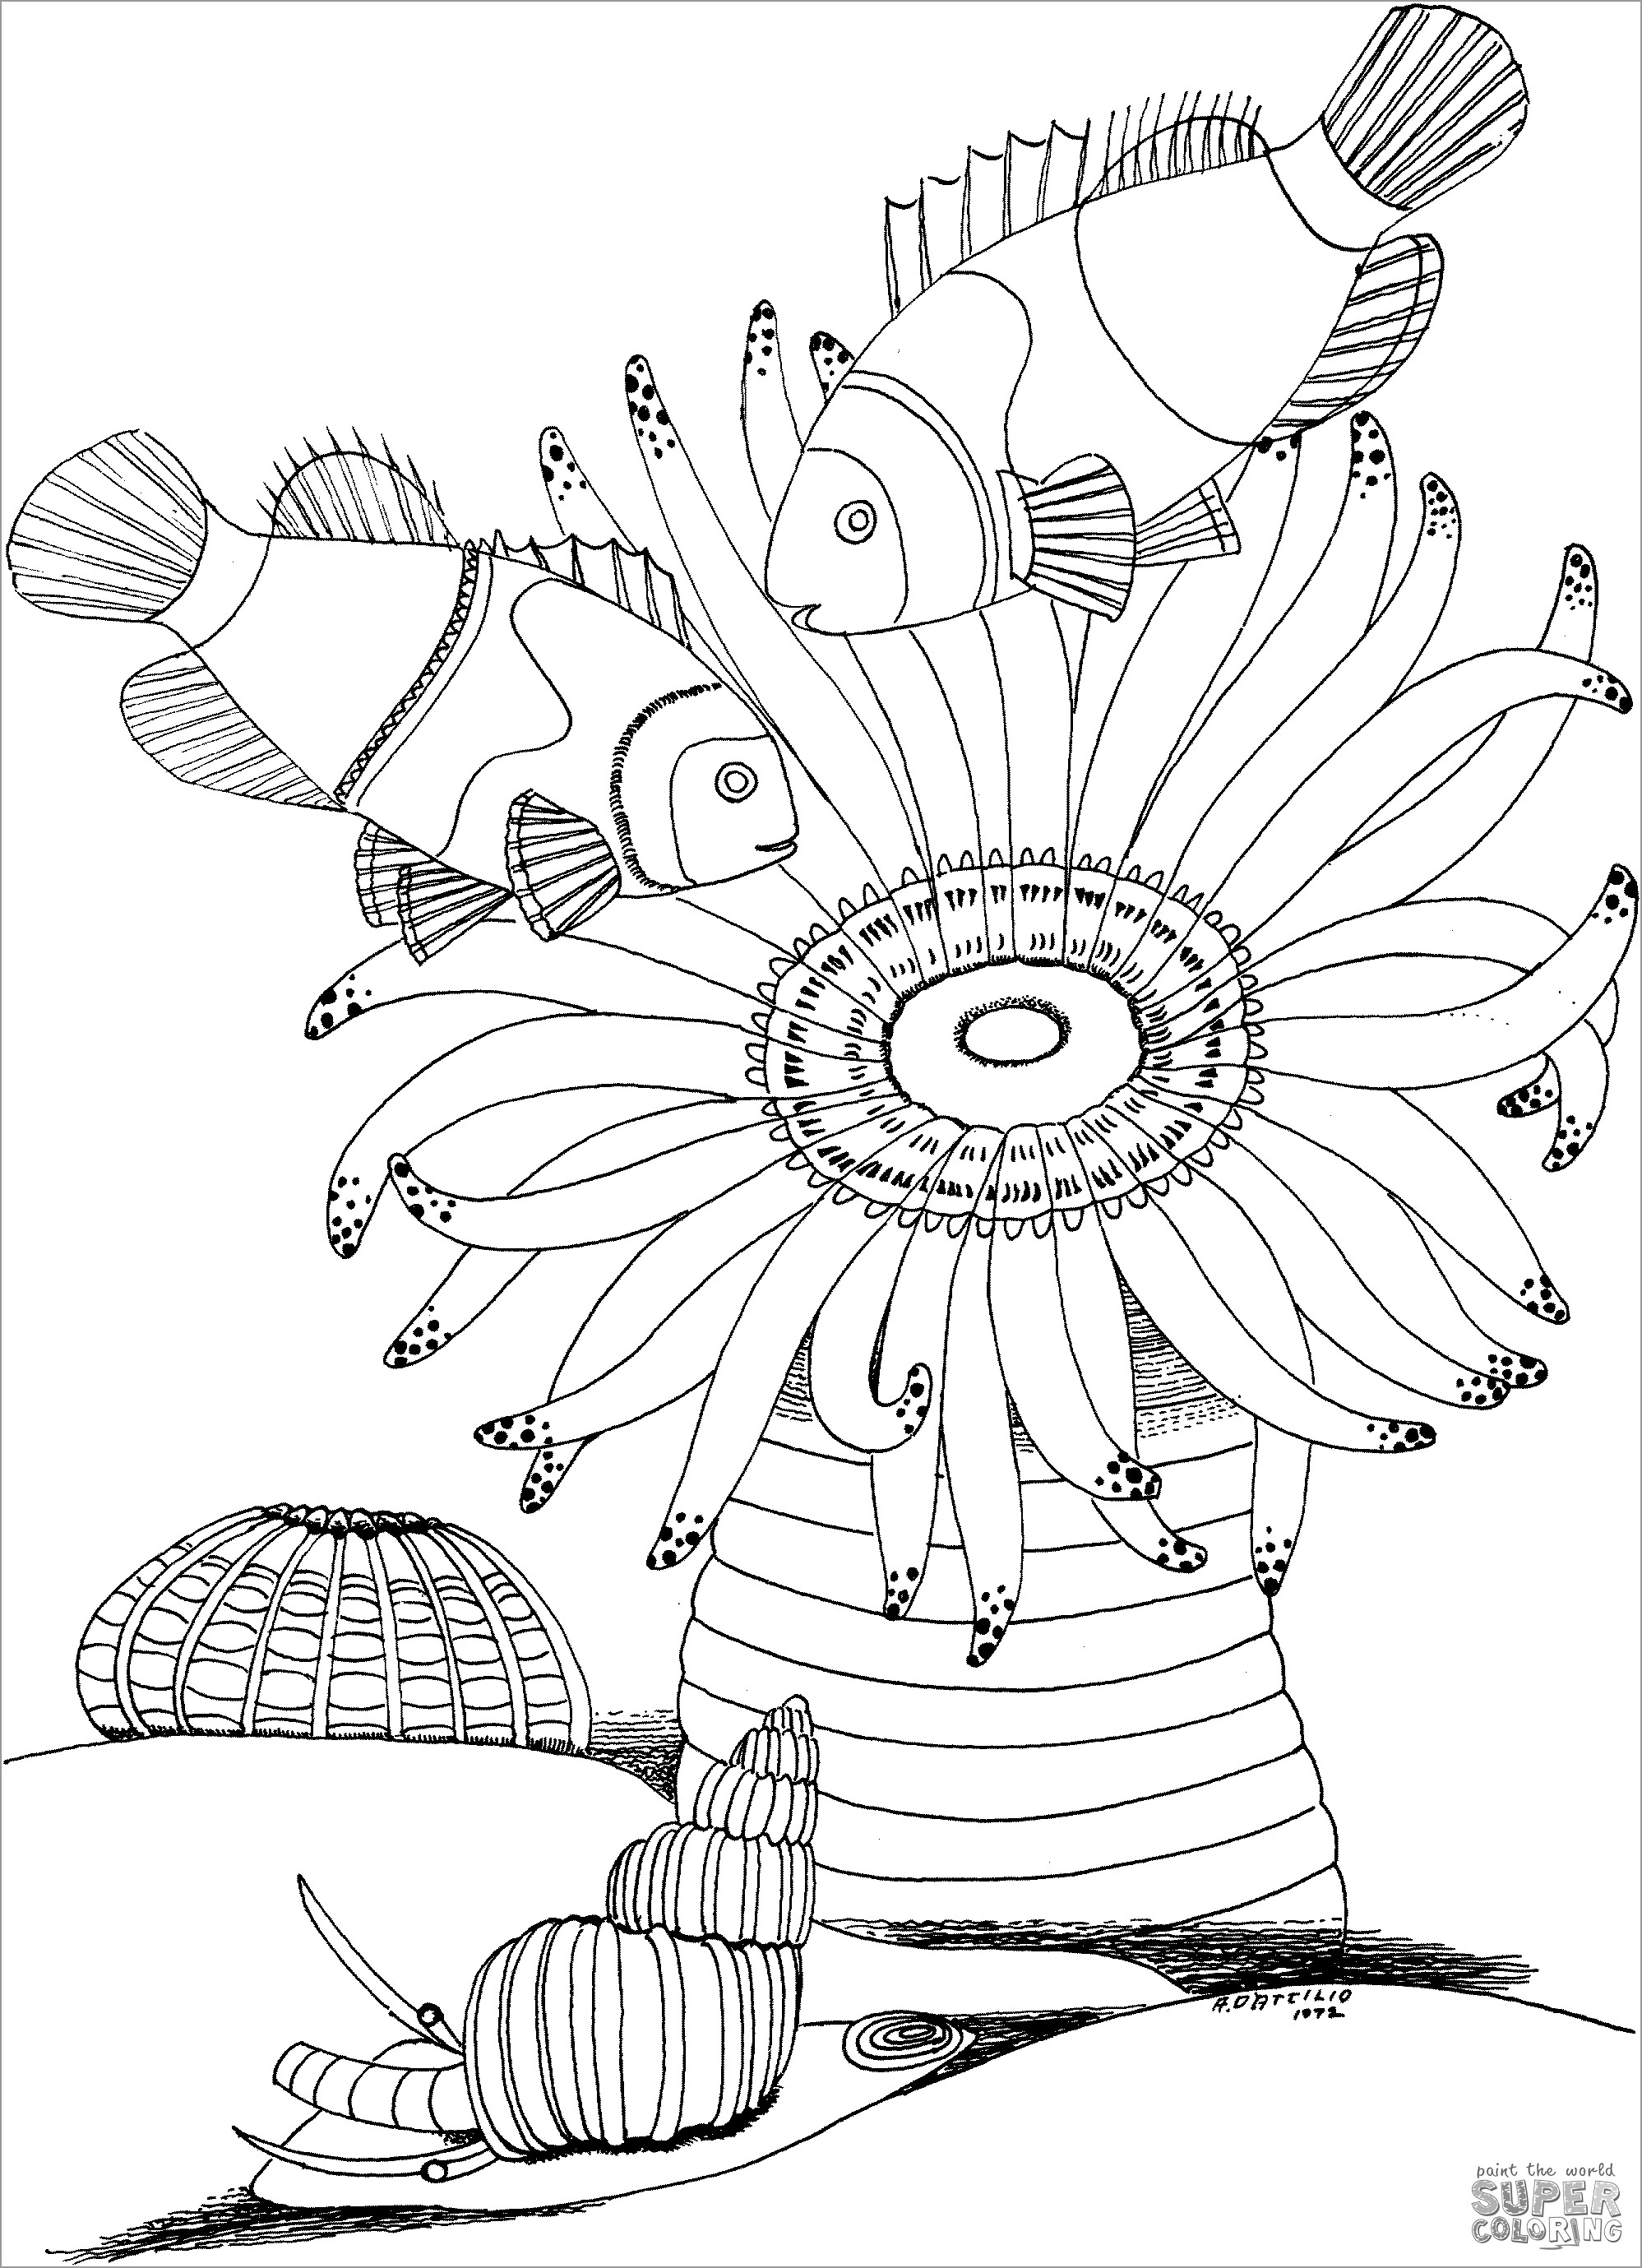 Sea Anemone and Snail Coloring Page